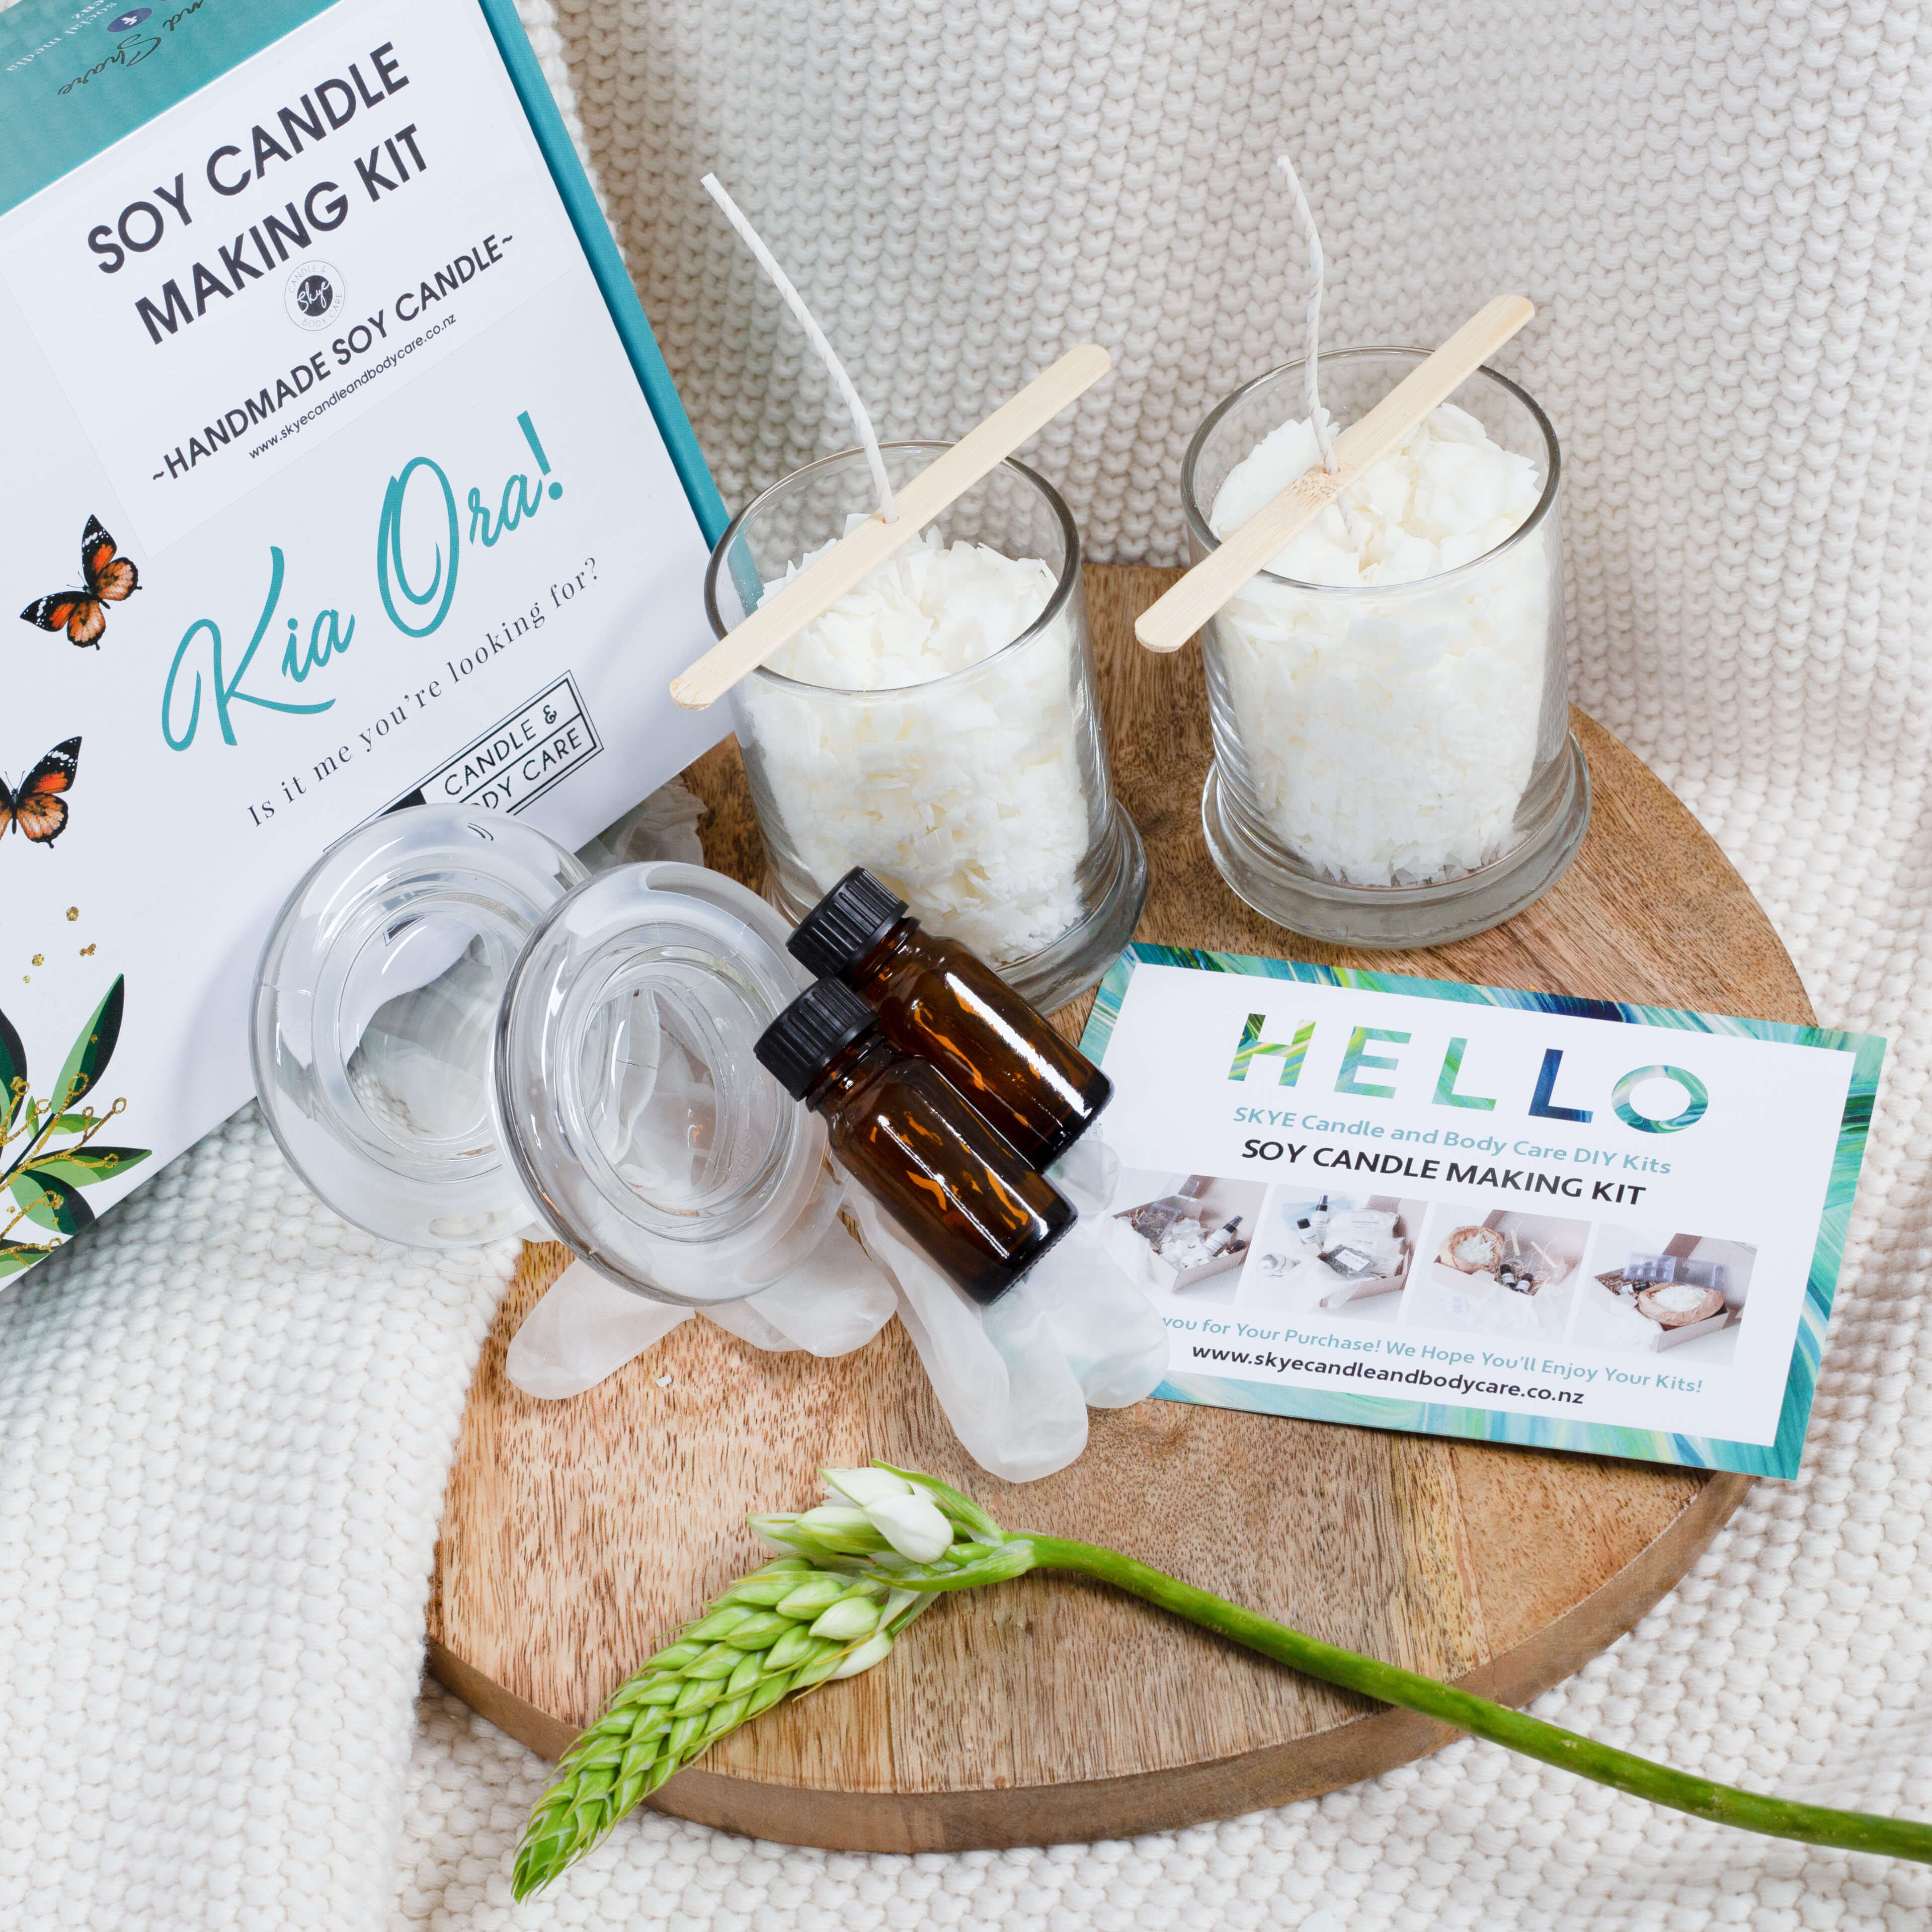 nz soy candle making kit